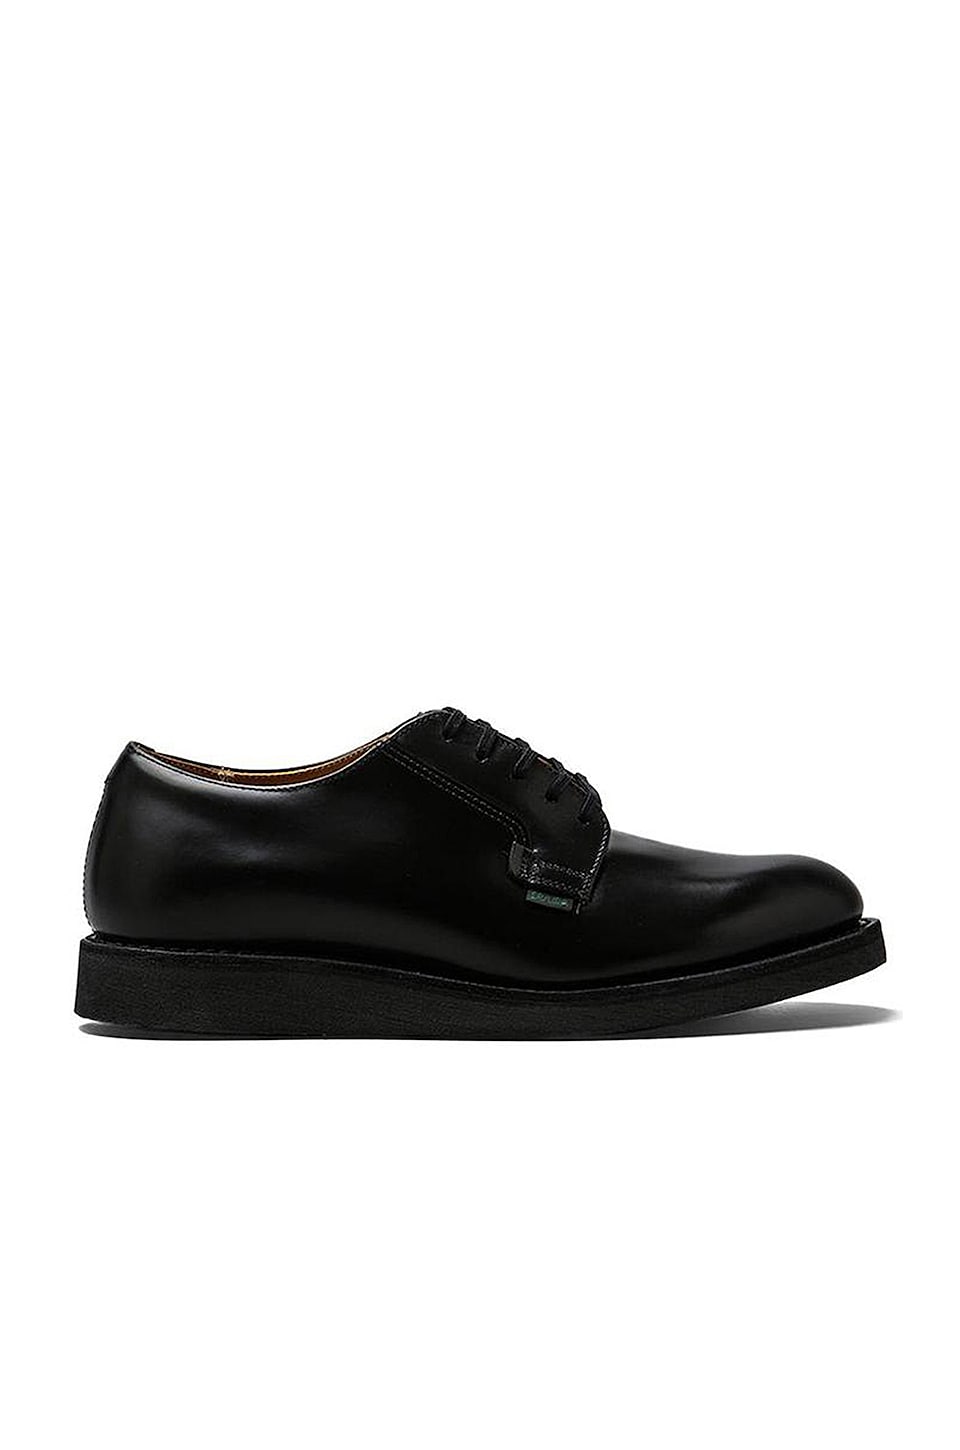 Red Wing Shoes Postman Oxford in Black Chaparral | REVOLVE